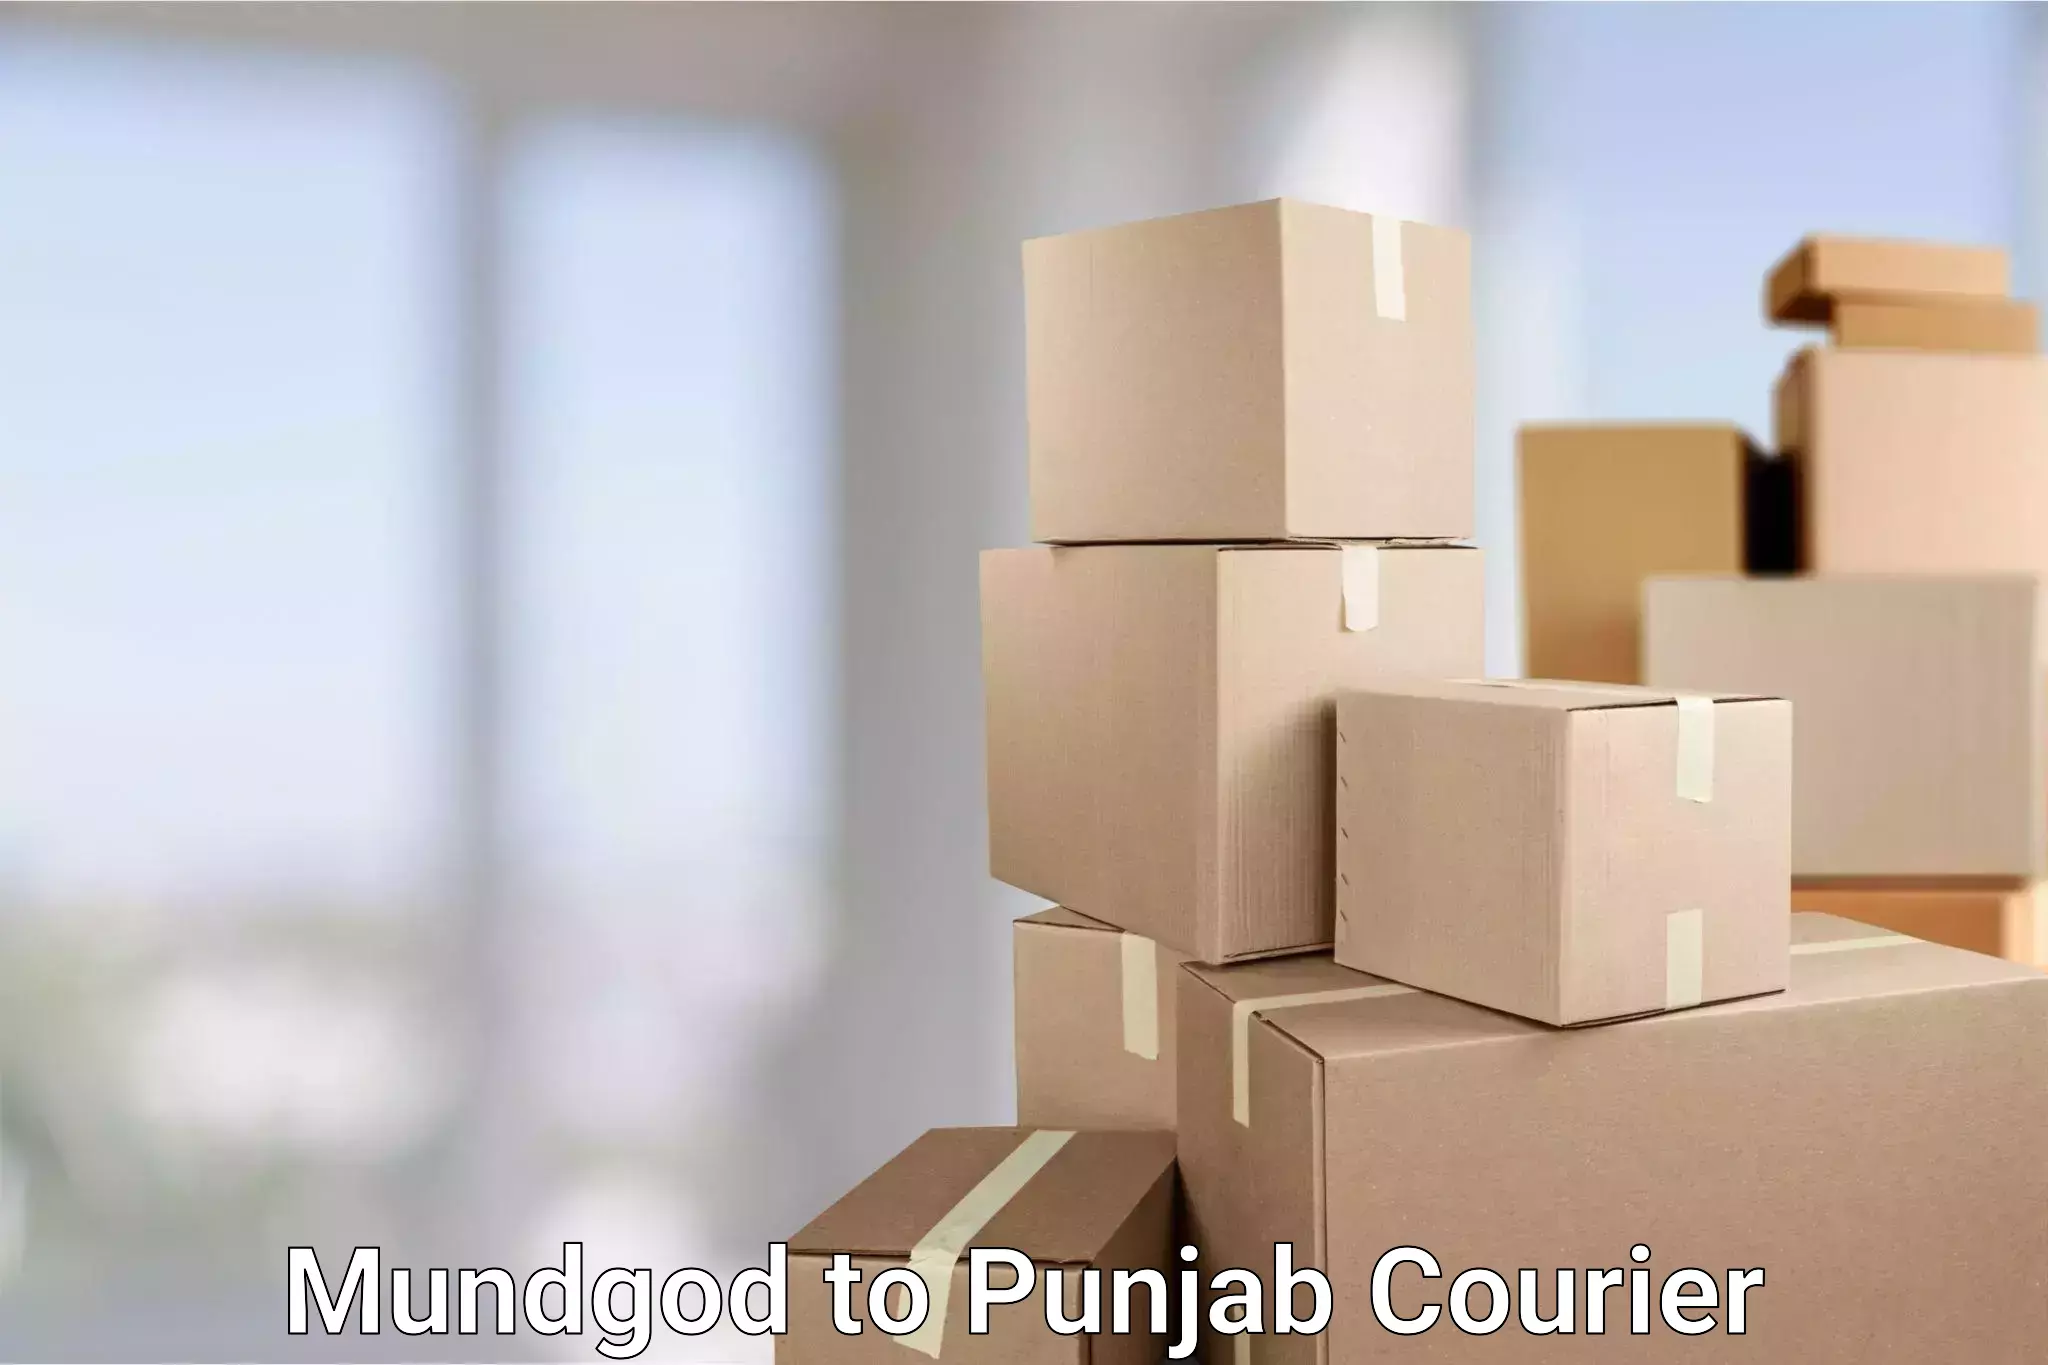 Courier service efficiency Mundgod to Sultanpur Lodhi